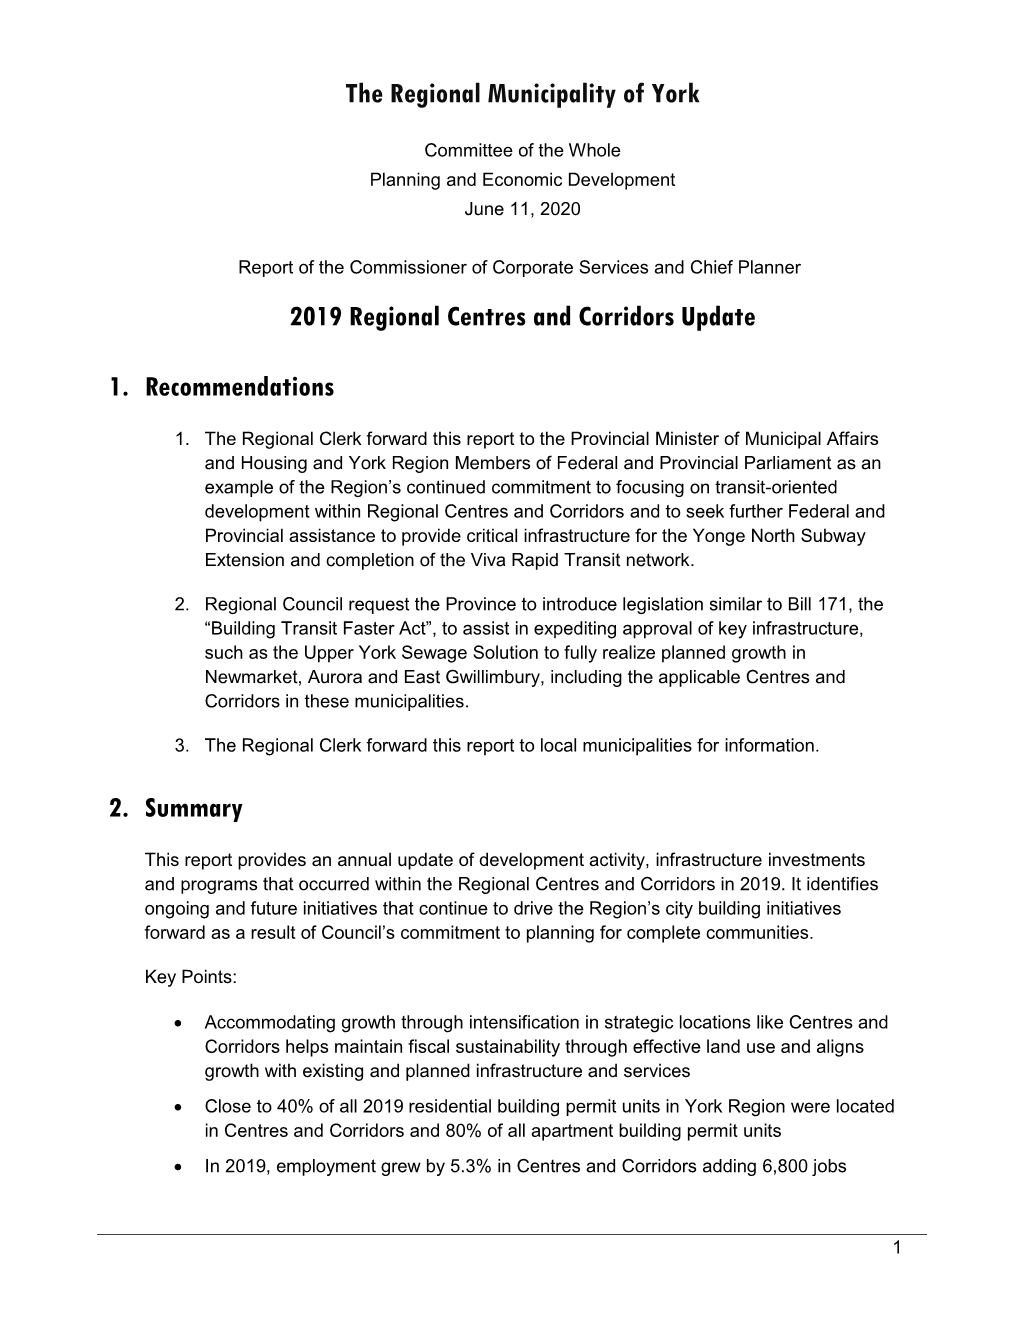 2019 Regional Centres and Corridors Update 1. Recommendations